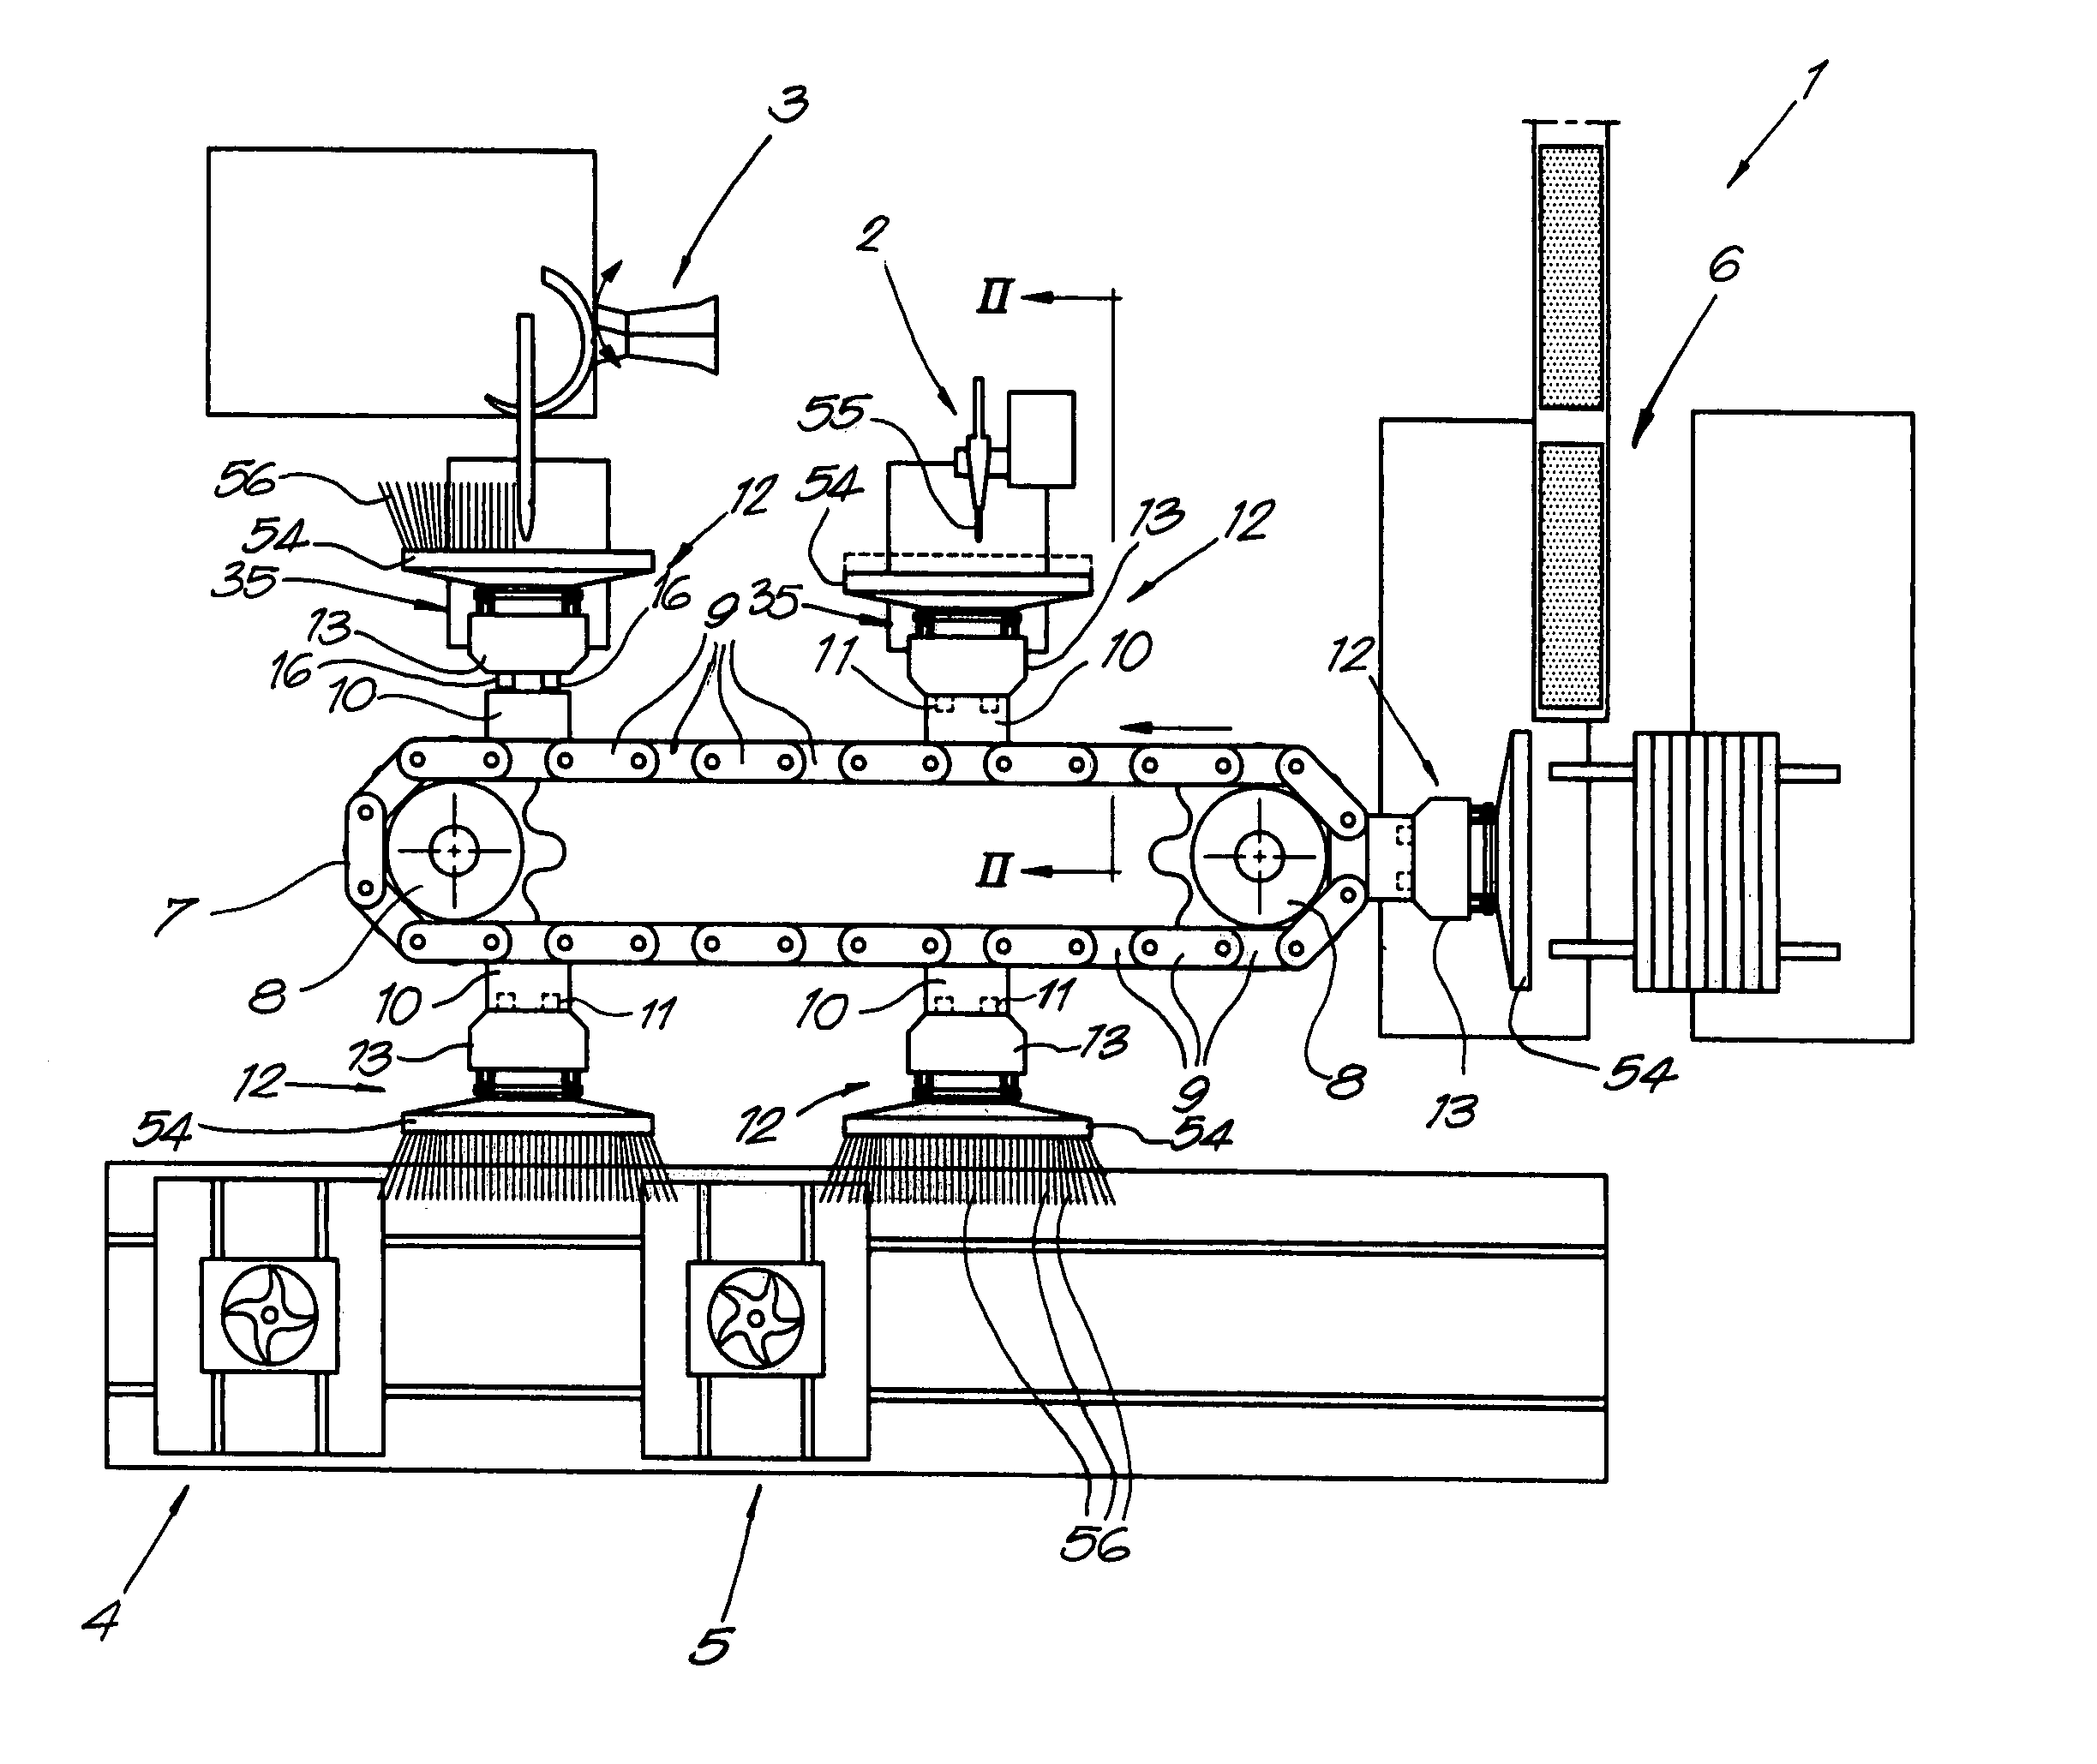 Device for manufacturing brushes